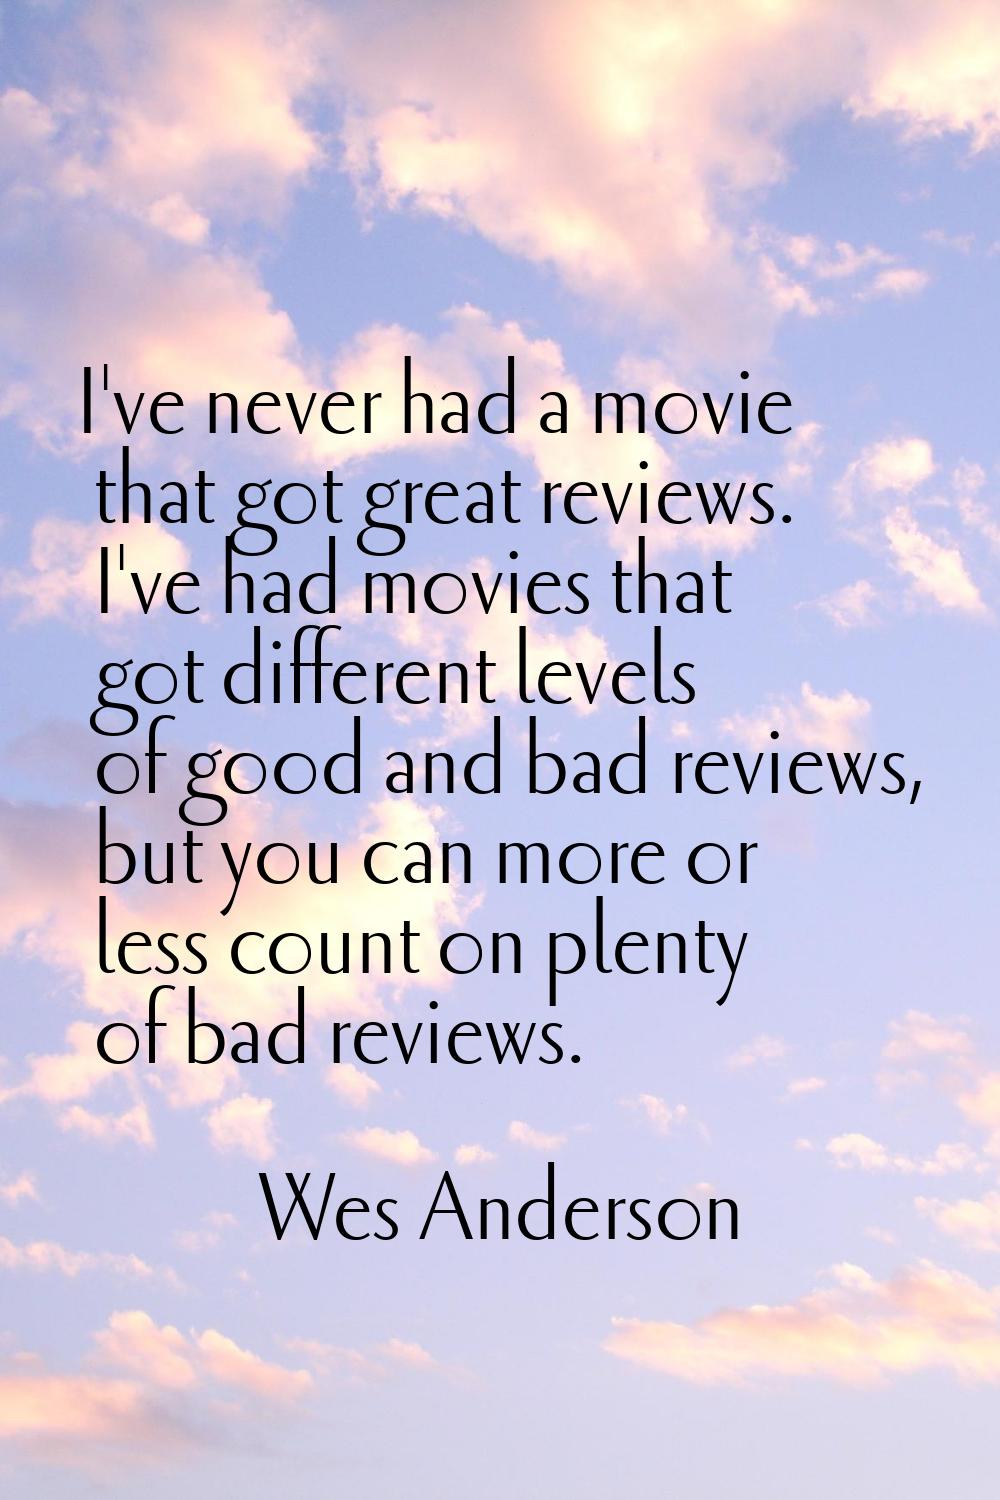 I've never had a movie that got great reviews. I've had movies that got different levels of good an